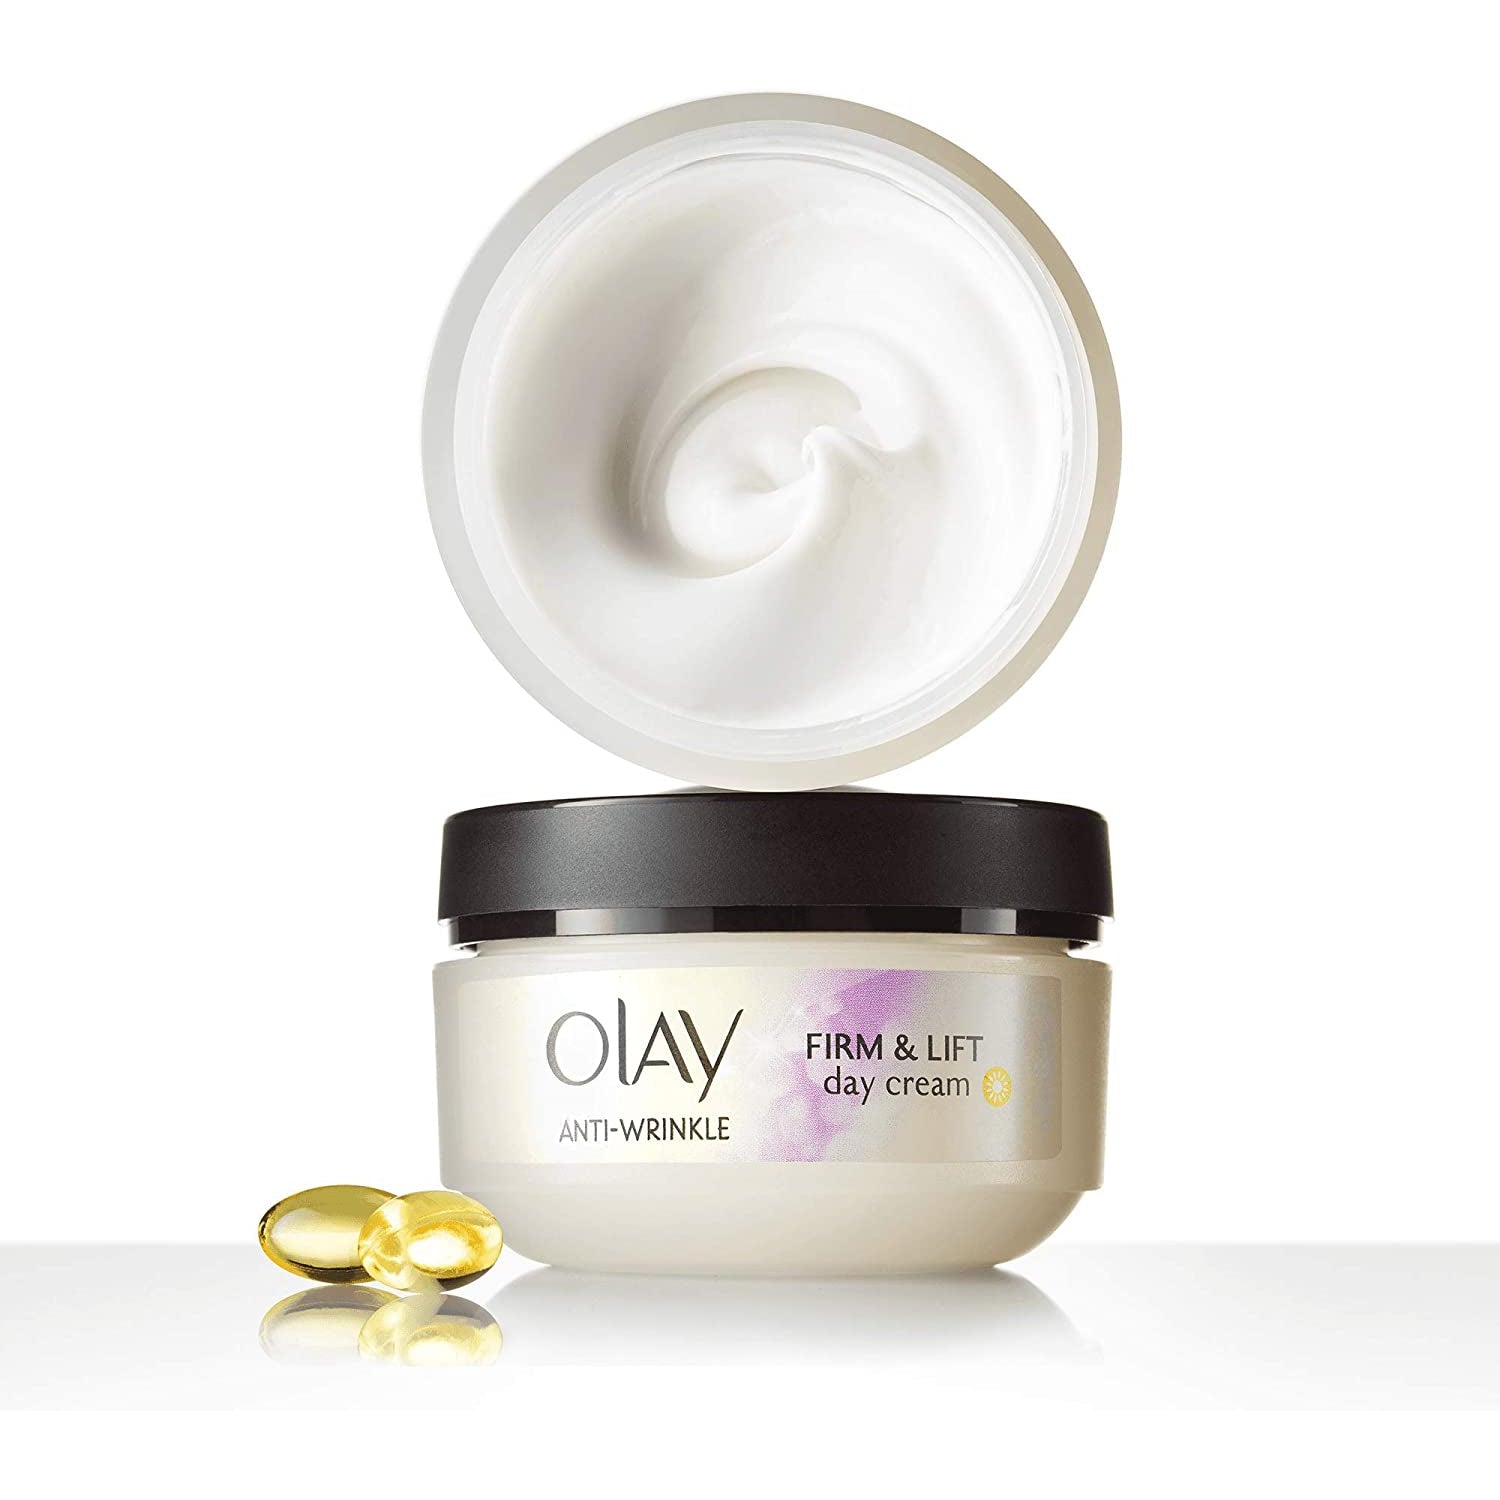 Olay Anti-Wrinkle Firm & Lift SPF 15 Day Cream, 50ml - Healthxpress.ie